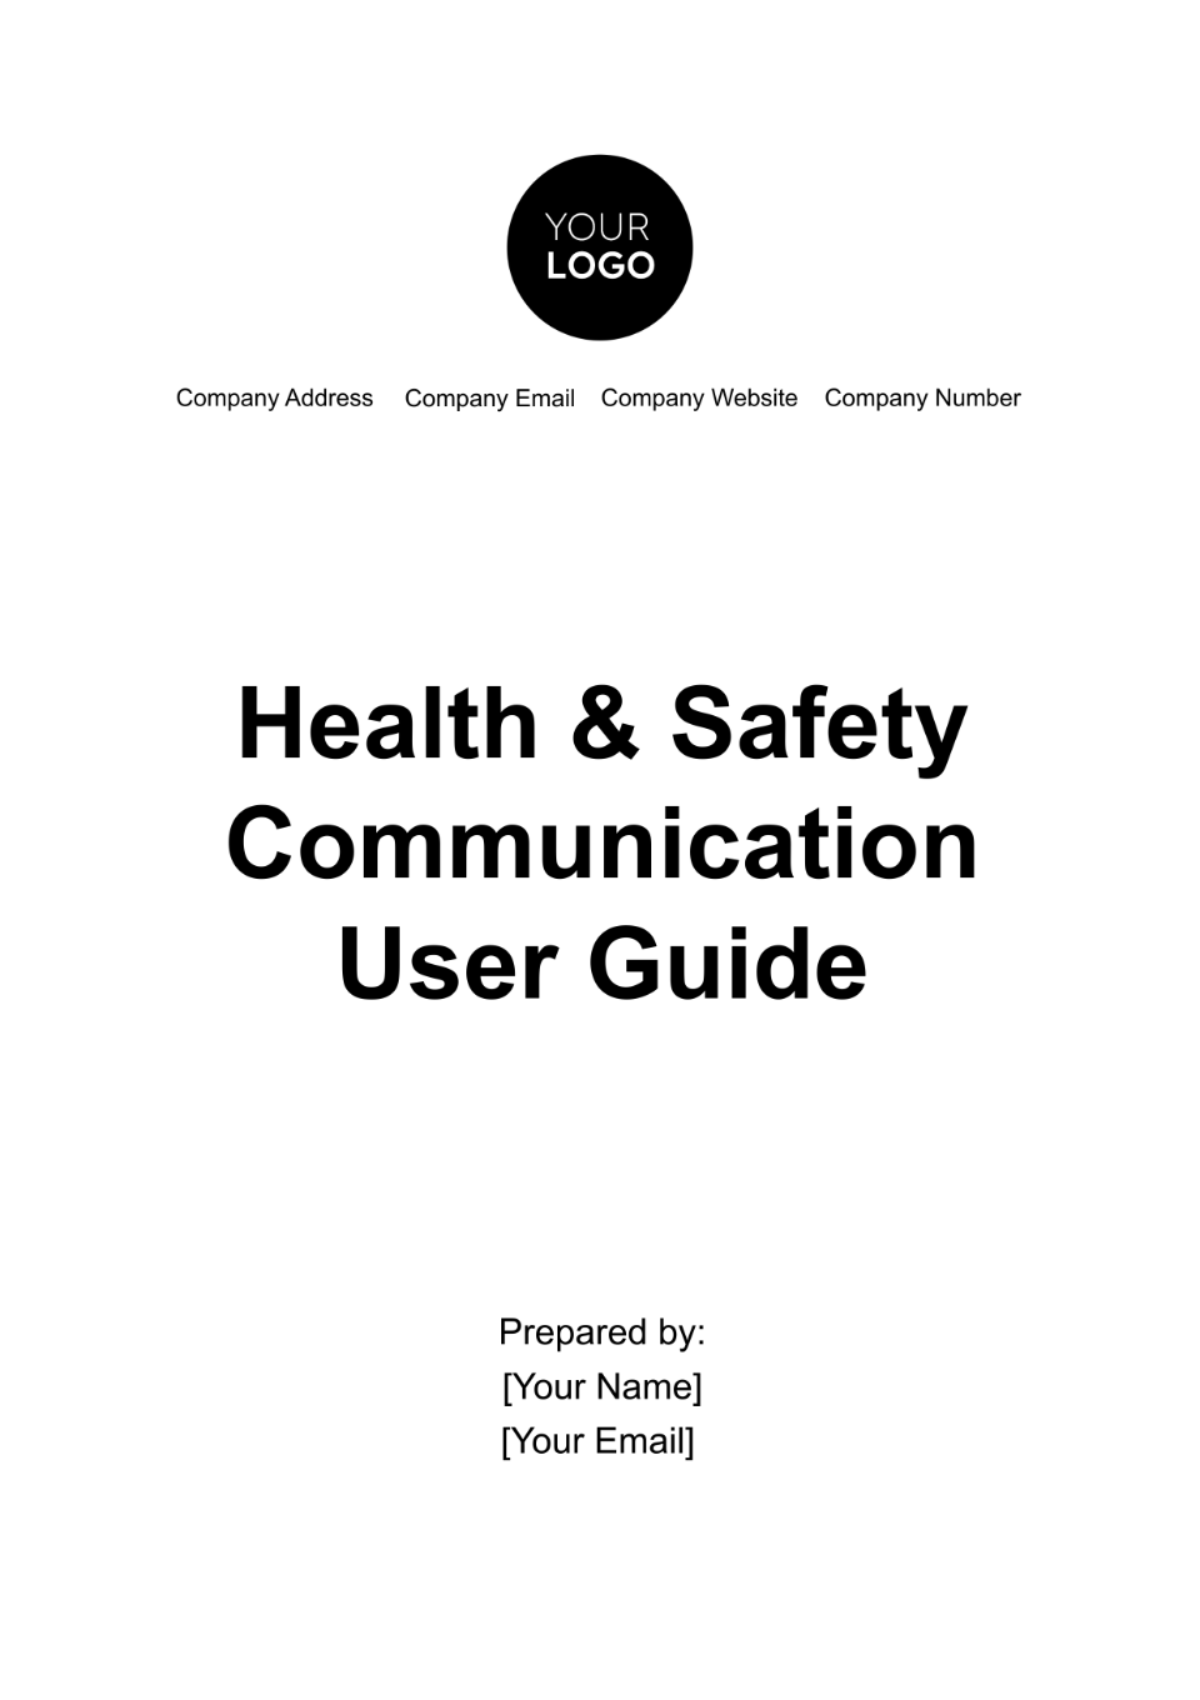 Health & Safety Communication User Guide Template